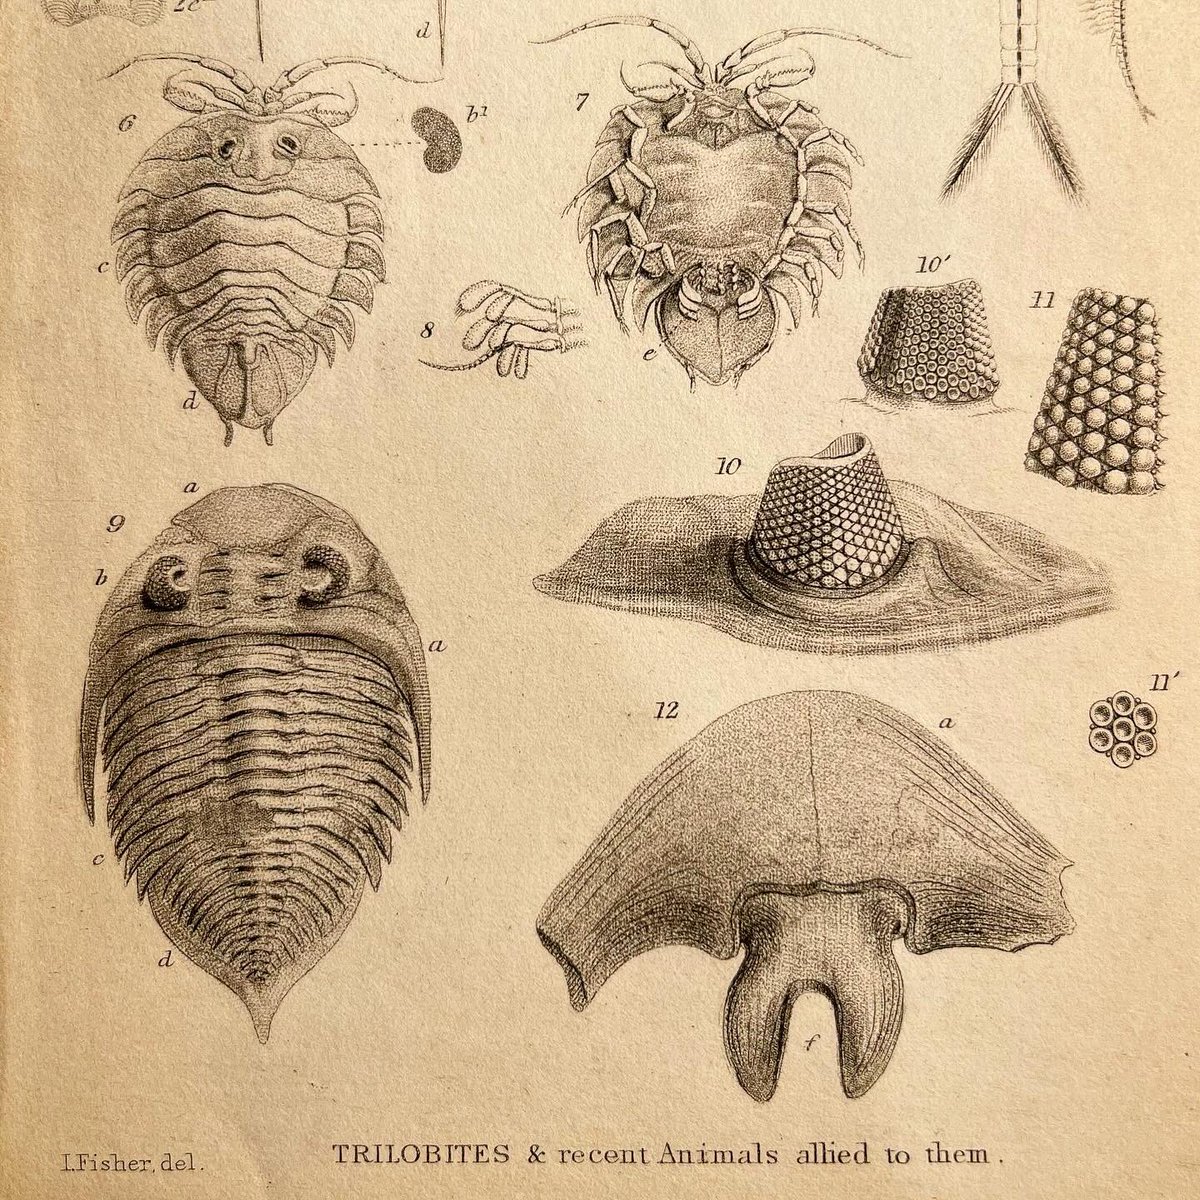 Nice trilobite illustration highlighting the superficial similarity of trilobites and Serolidae (Crustacea). Taken from Rev. William Buckland (1784-1856), Geology and mineralogy considered with reference to natural theology, Vol. II, 1837, plate 45
#trilobites #fossilfriday